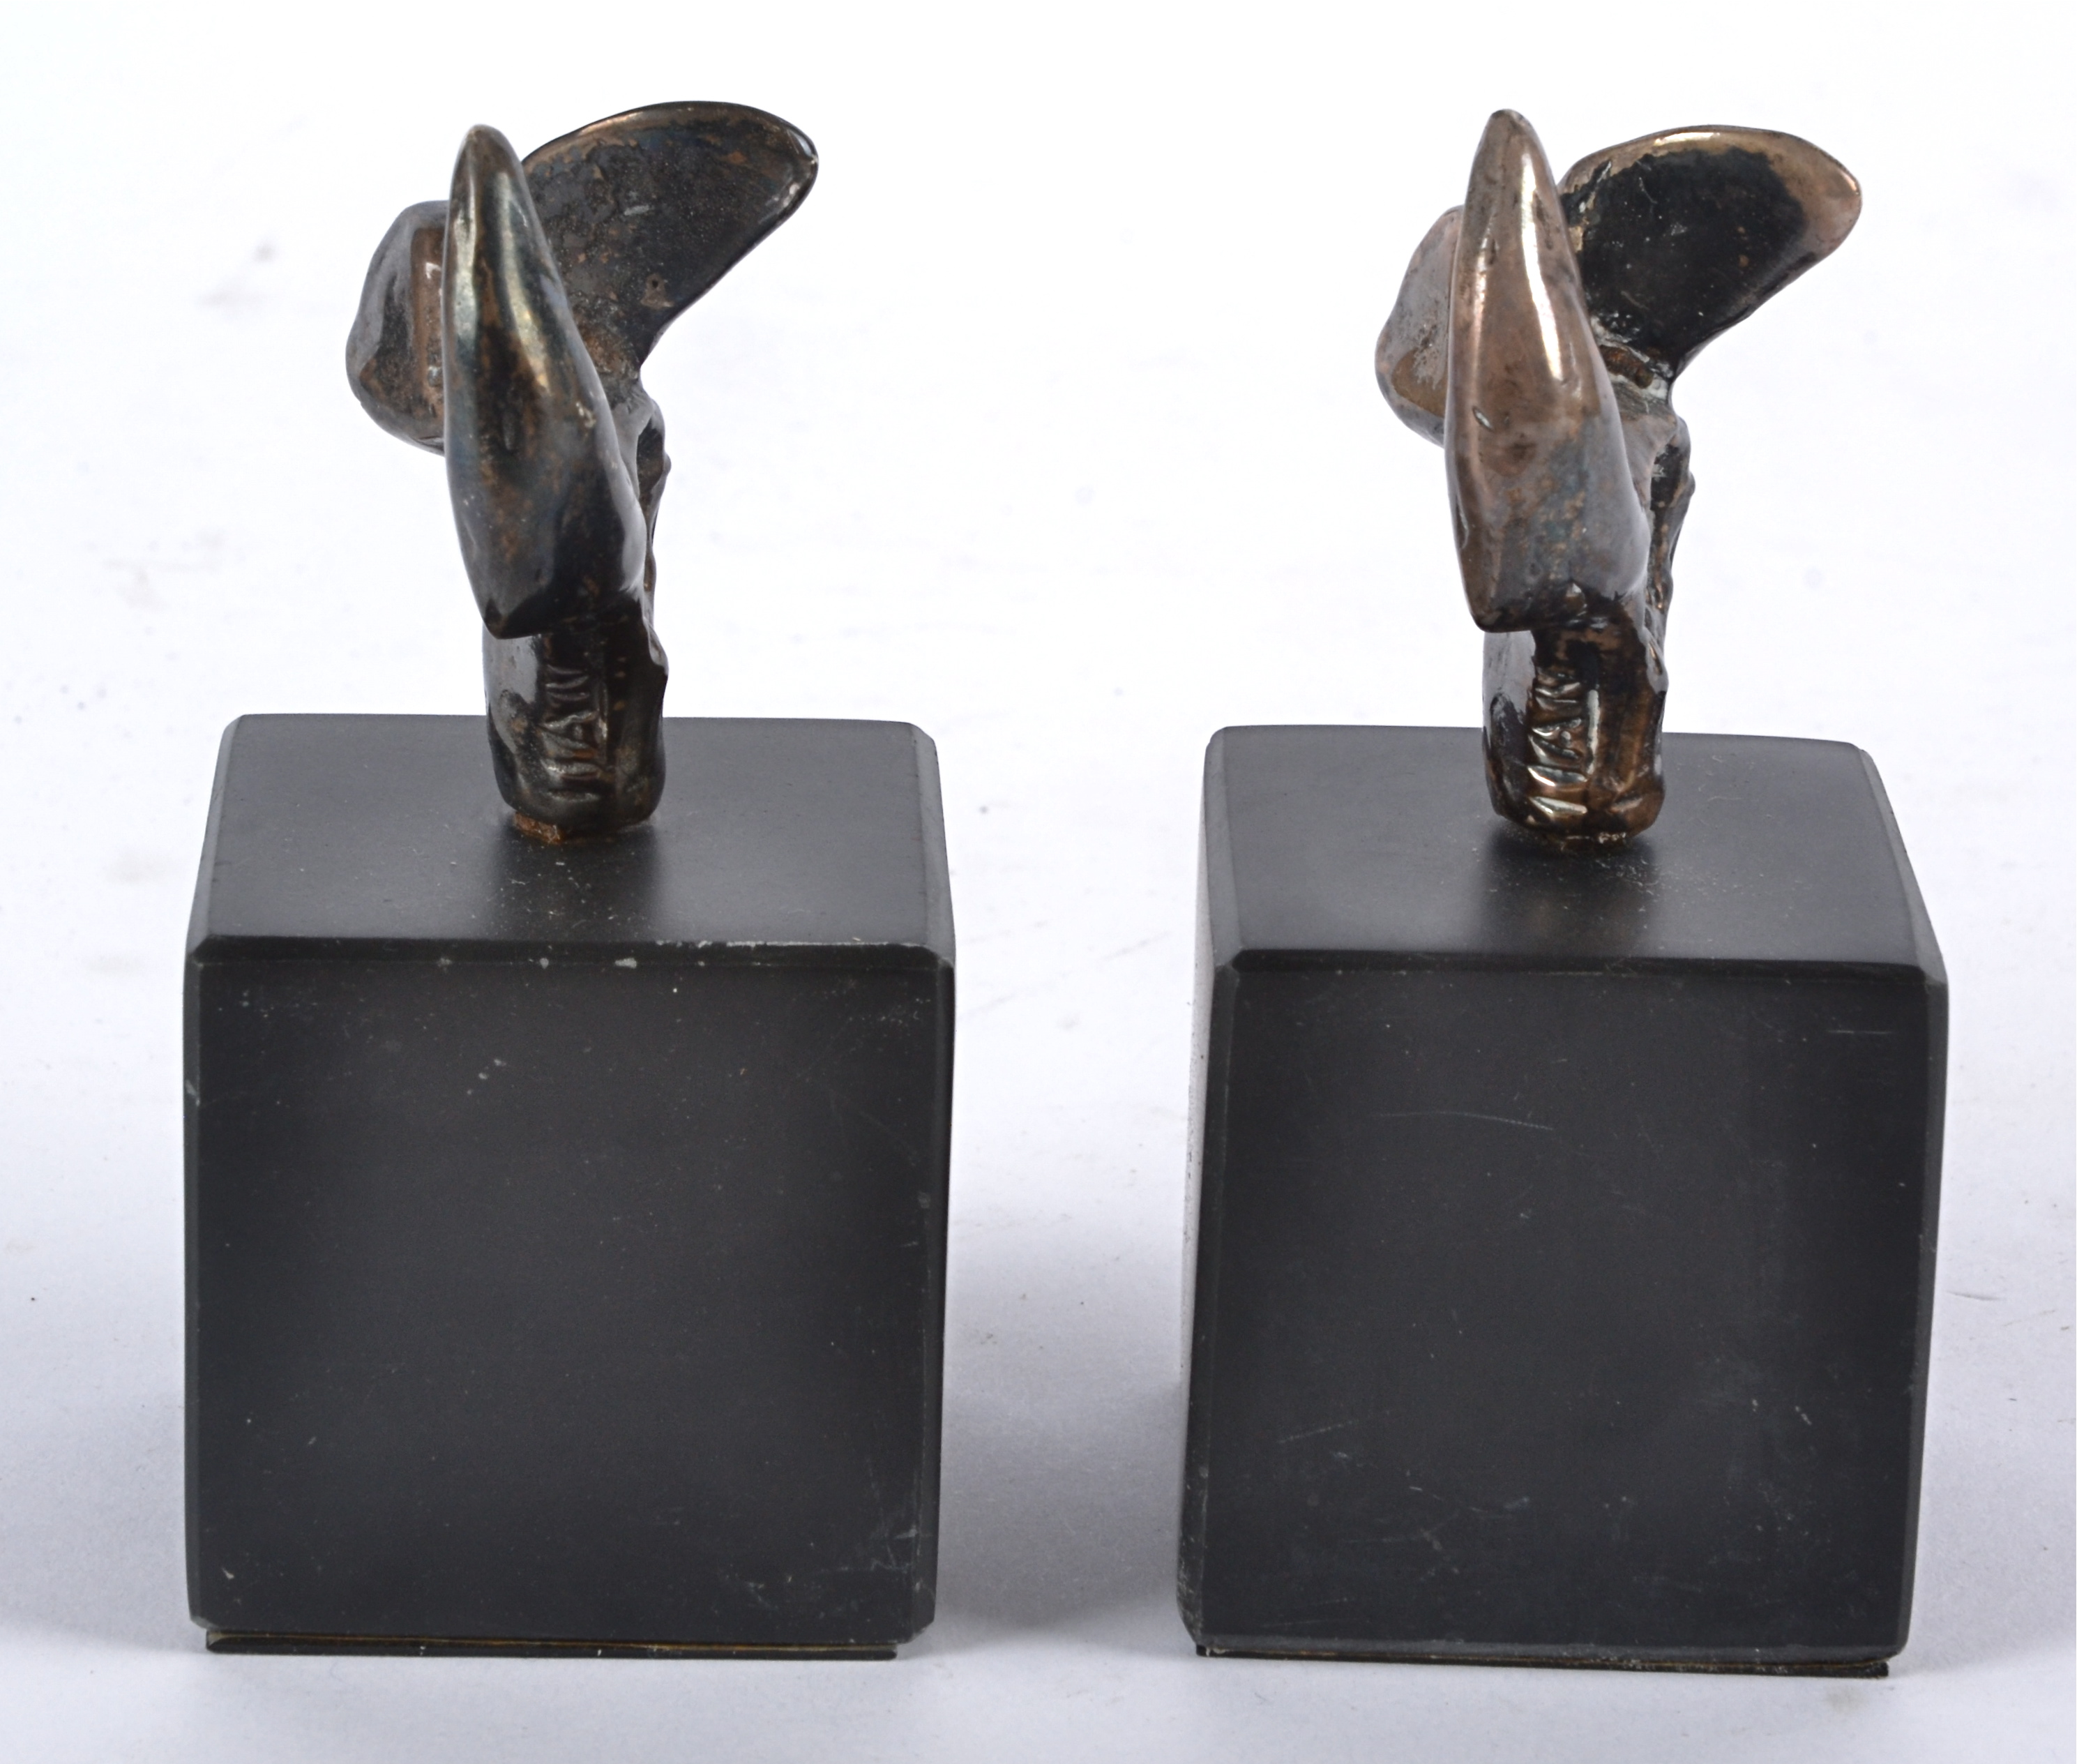 Two Eli Ilan (1928-1982) abstract silver sculptures, on black plinth bases, later recasting, - Image 5 of 6